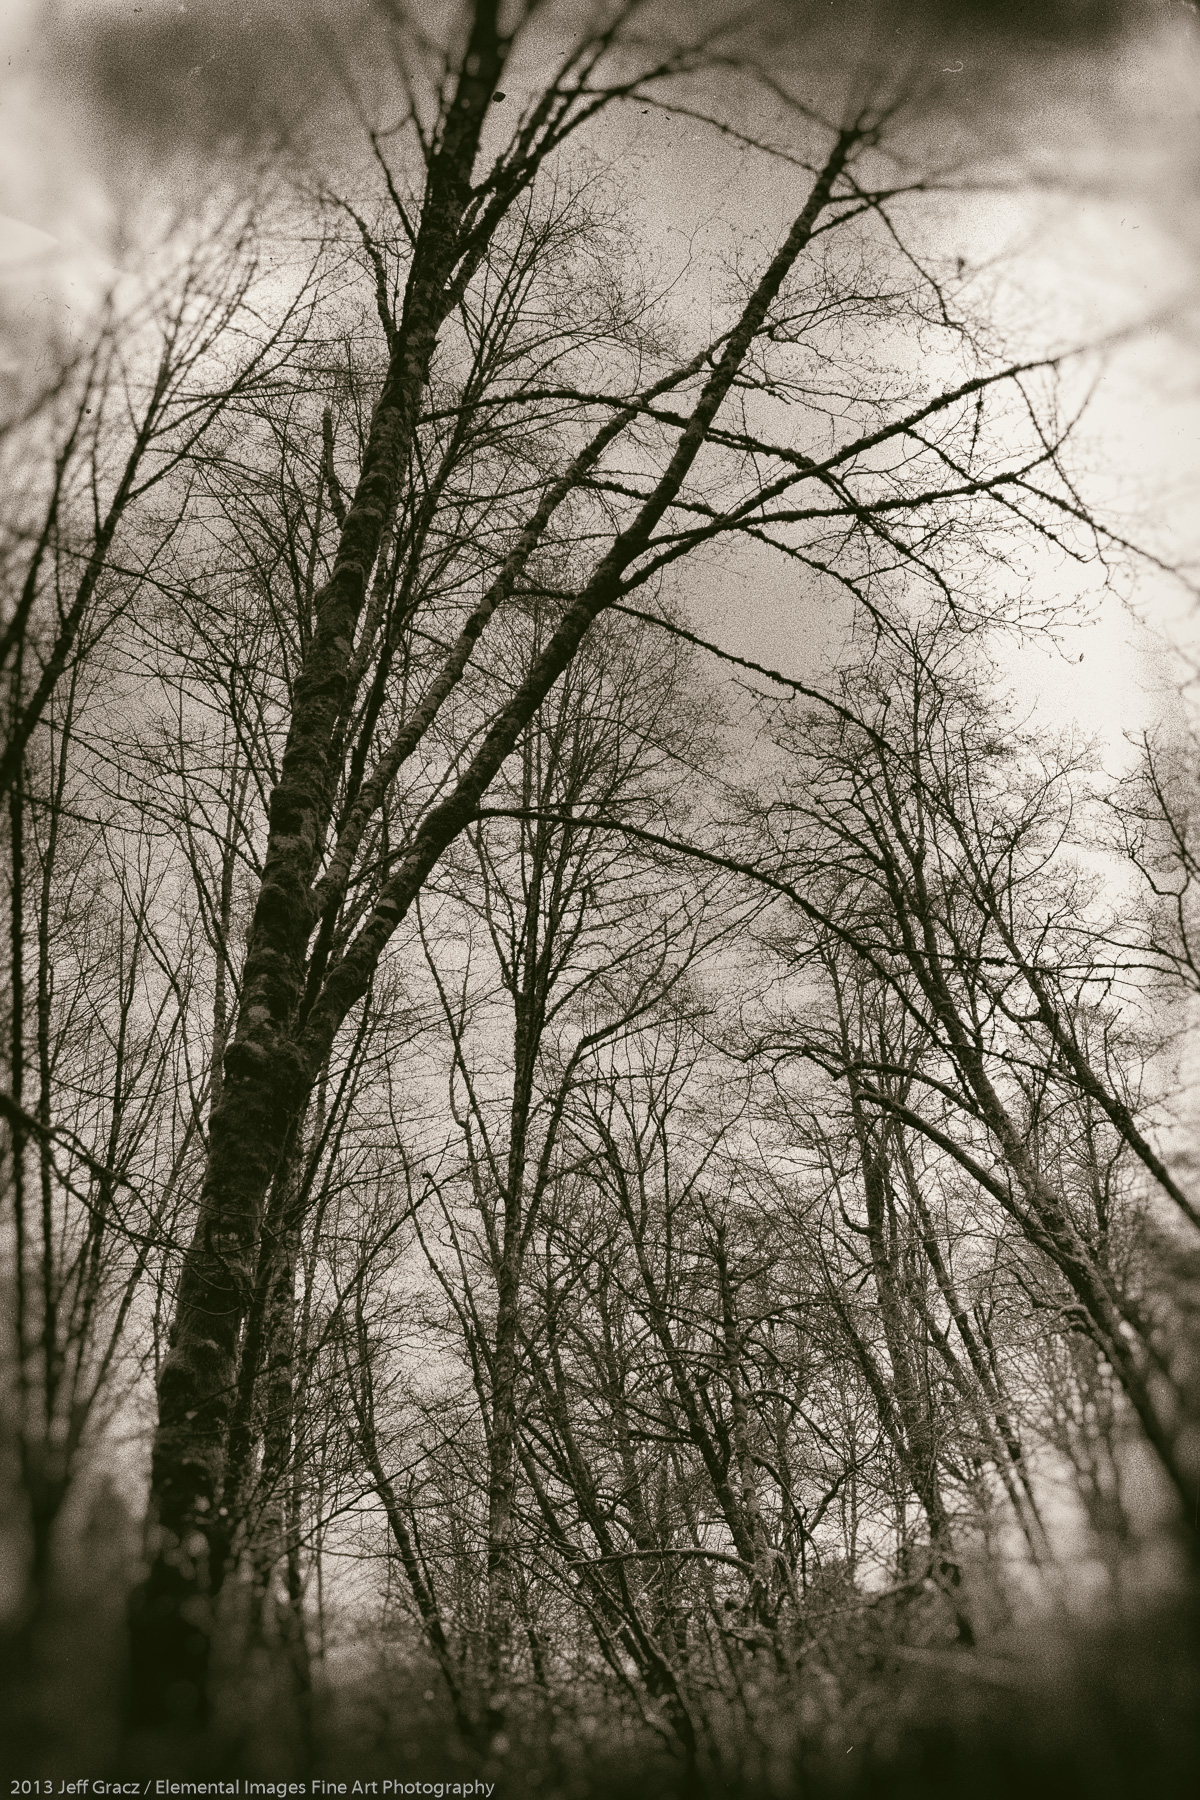 Branches V | Portland | OR | USA - © 2013 Jeff Gracz / Elemental Images Fine Art Photography - All Rights Reserved Worldwide